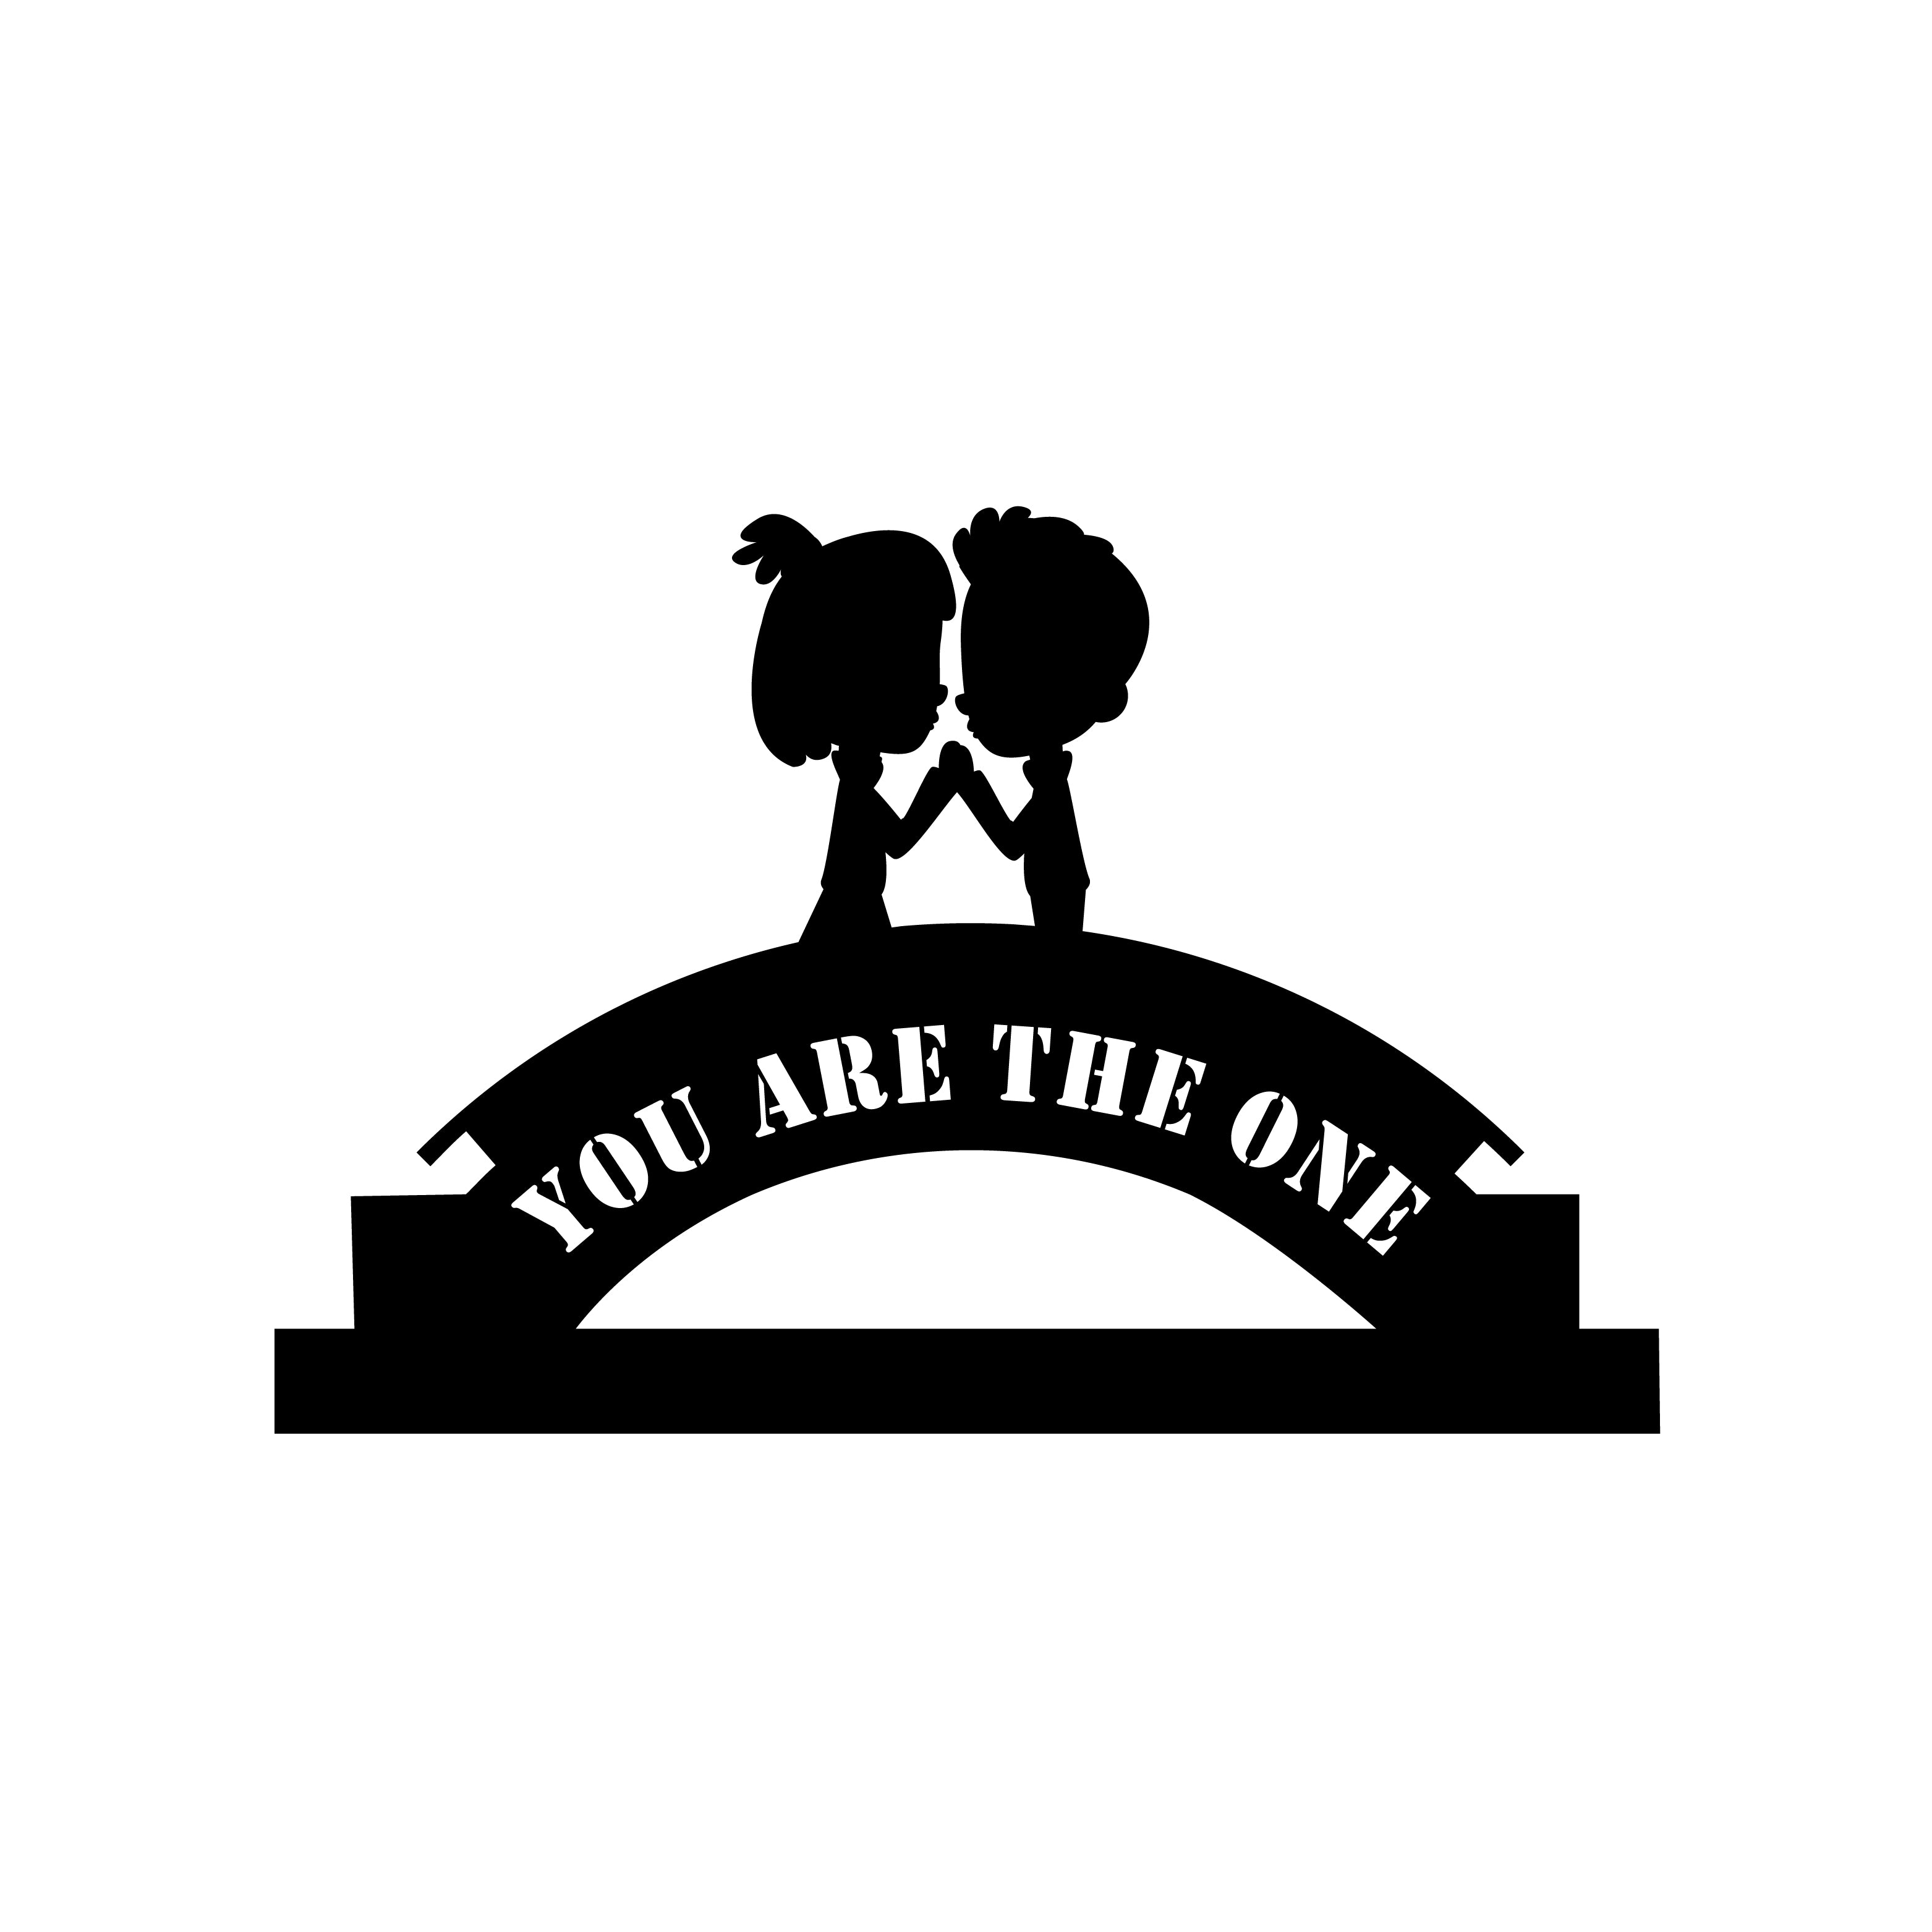 "You are the One" Black Engineered Wood Wall Art Cutout, Ready to Hang Home Decor 2